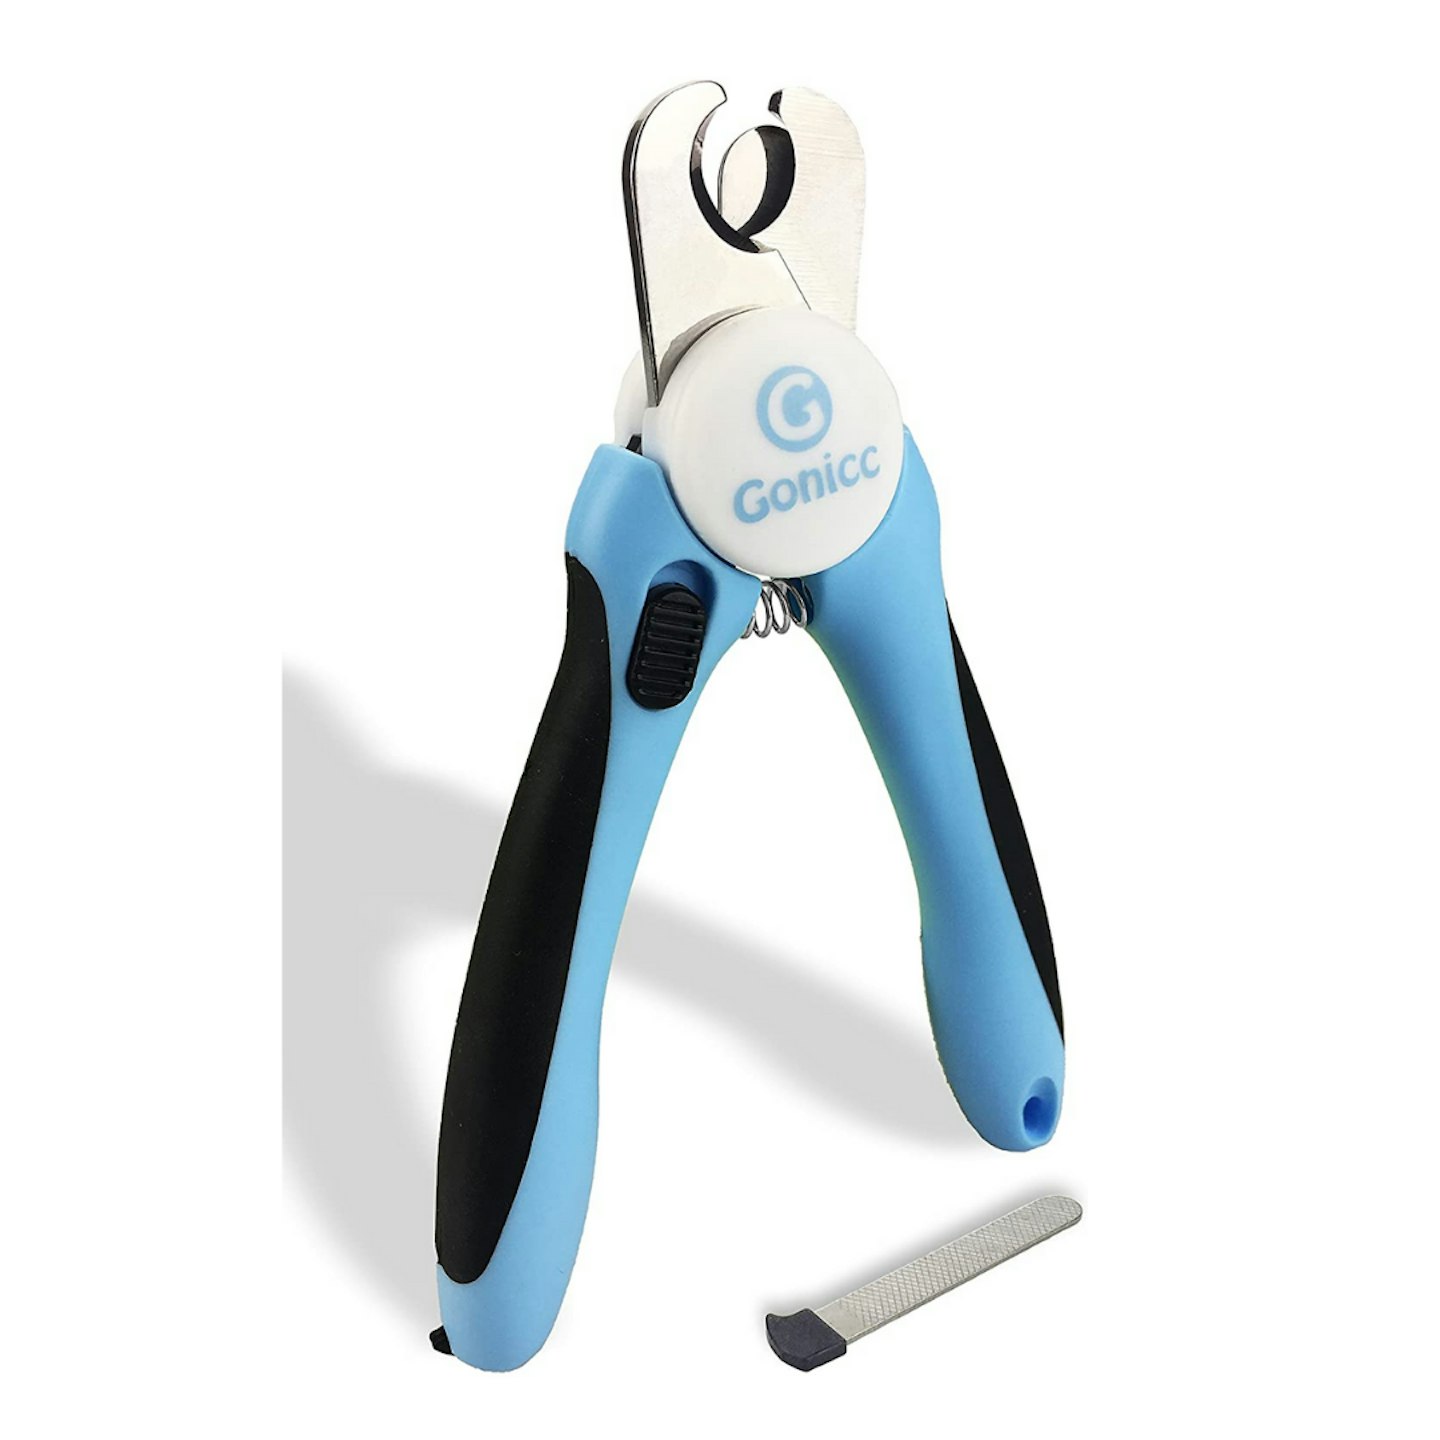 gonicc Dog & Cat Pets Nail Clippers